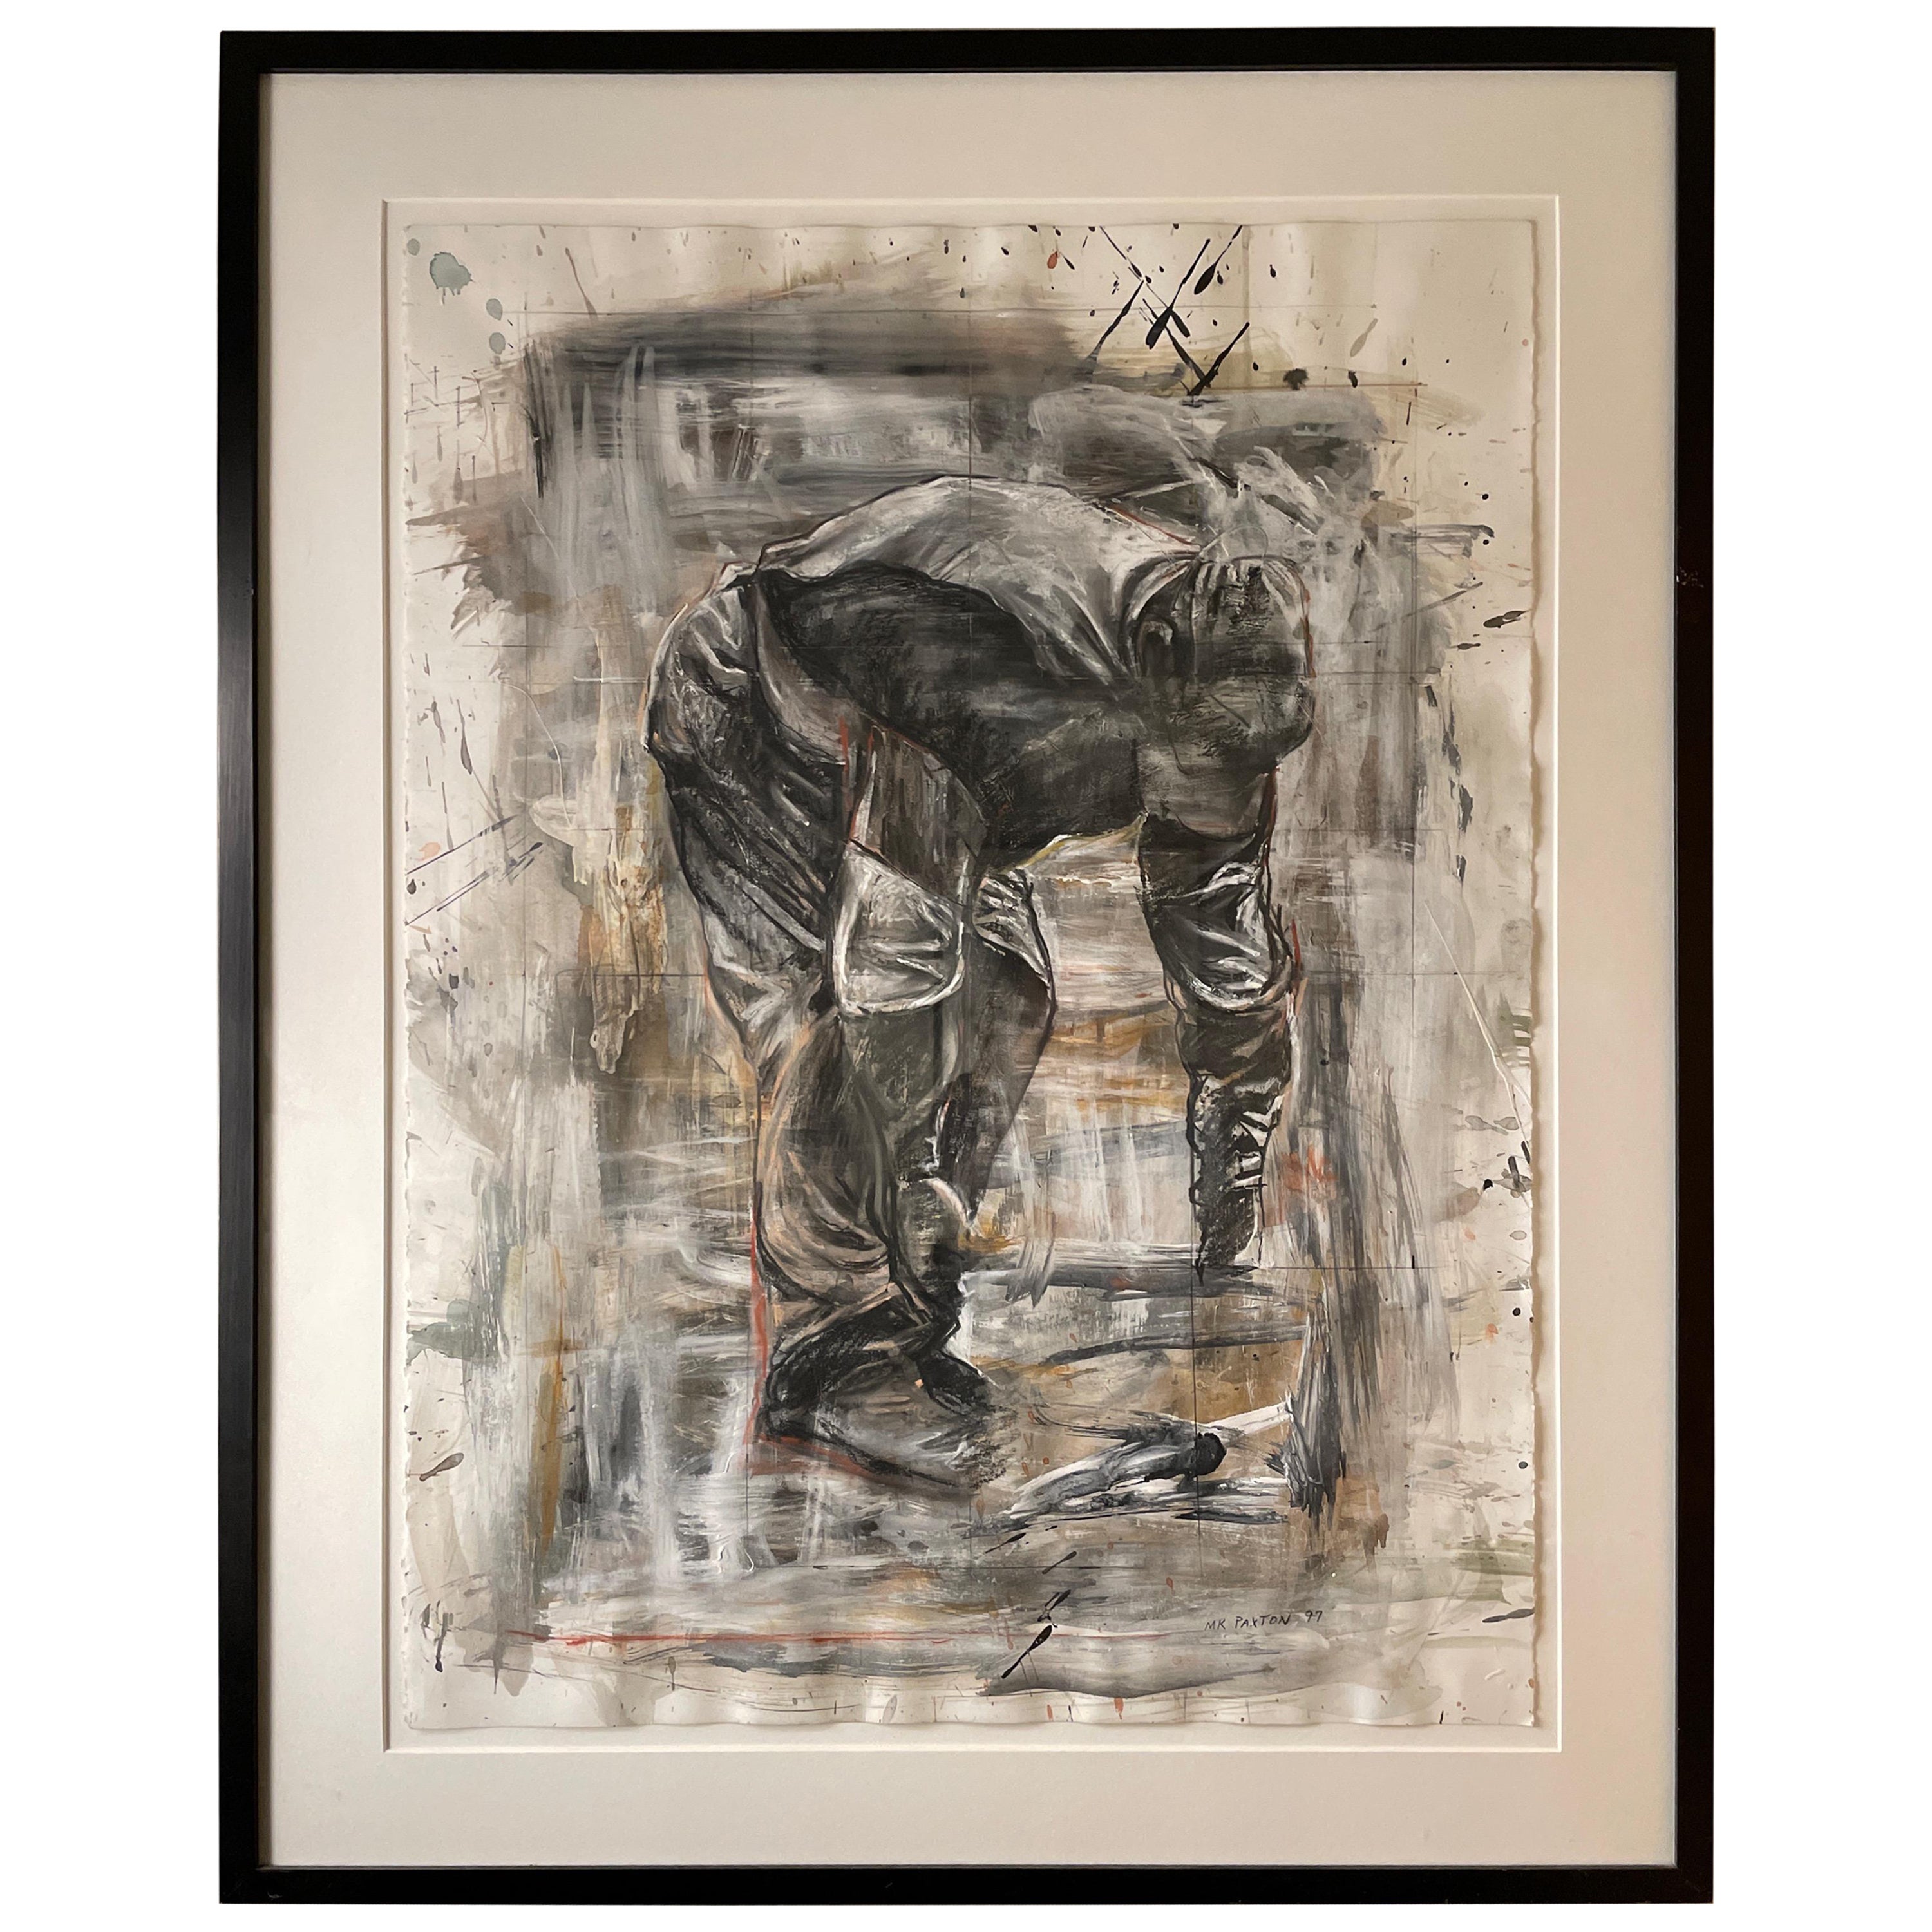 “Worker”, mixed media art by Michael K Paxton For Sale